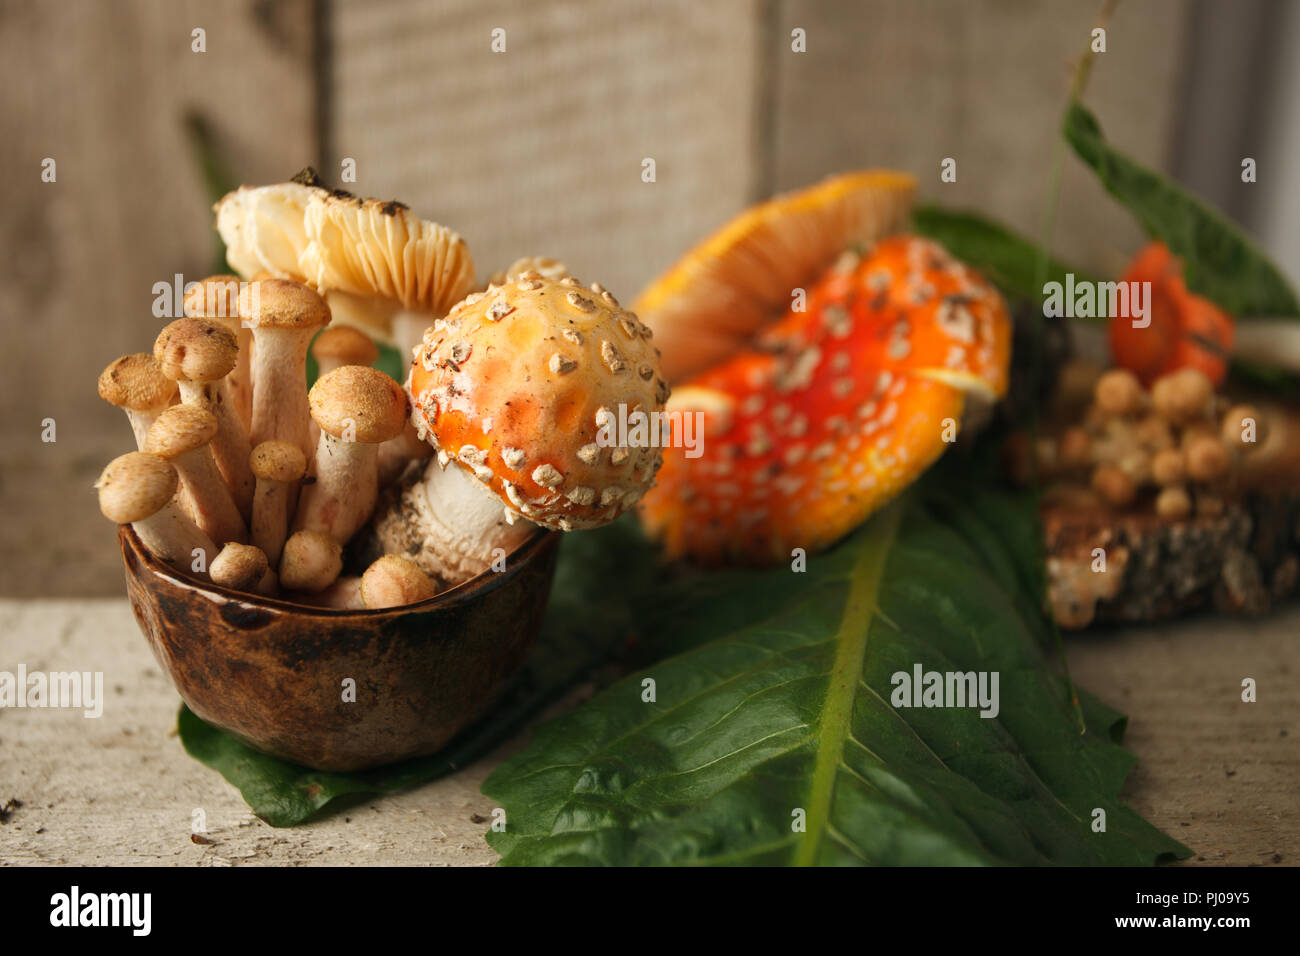 Magic Mushrooms and amanita Fly agaric on Wood, Shot on rustic wood in natural light Stock Photo